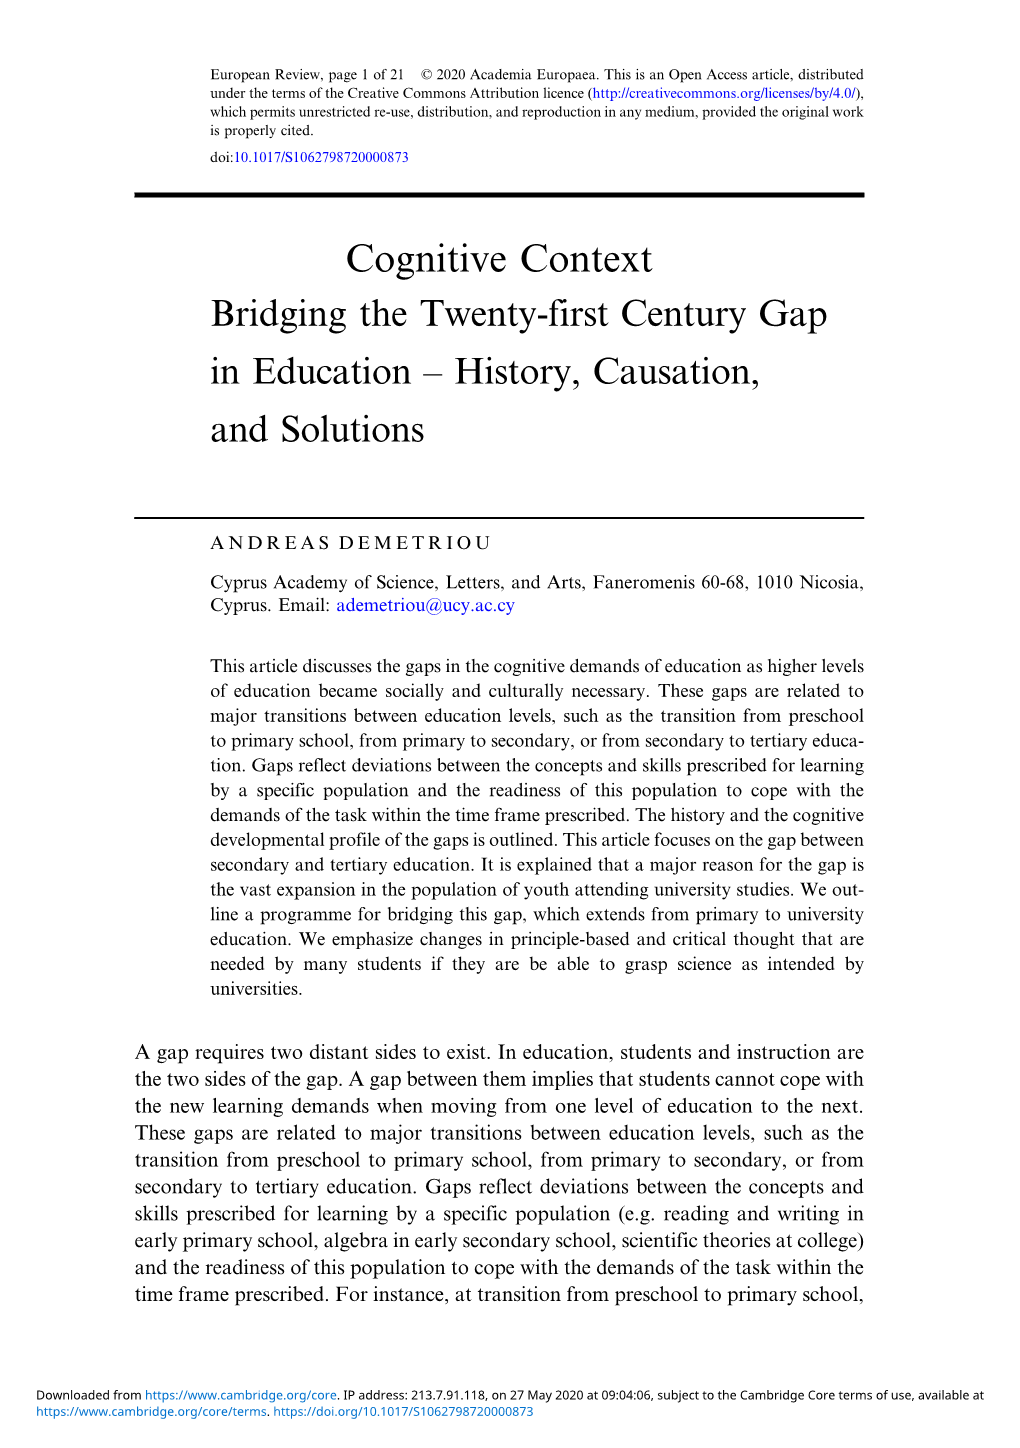 Bridging the Twenty-First Century Gap in Education – History, Causation, and Solutions